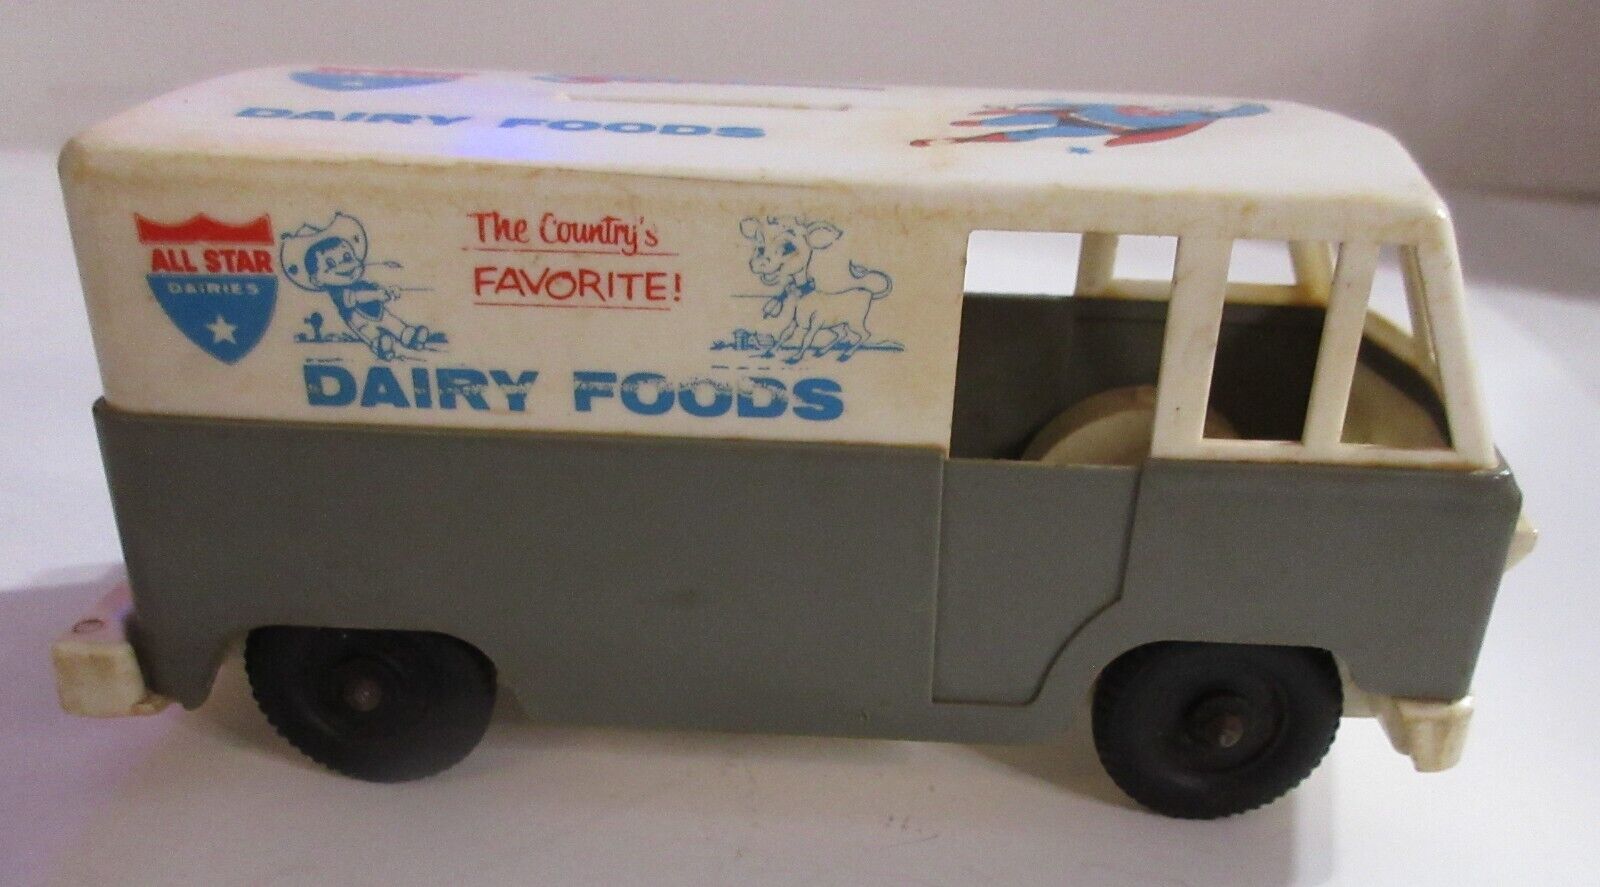 RARE Vintage 1950's All Star Dairy Foods SUPERMAN Advertising Bank Truck HTF